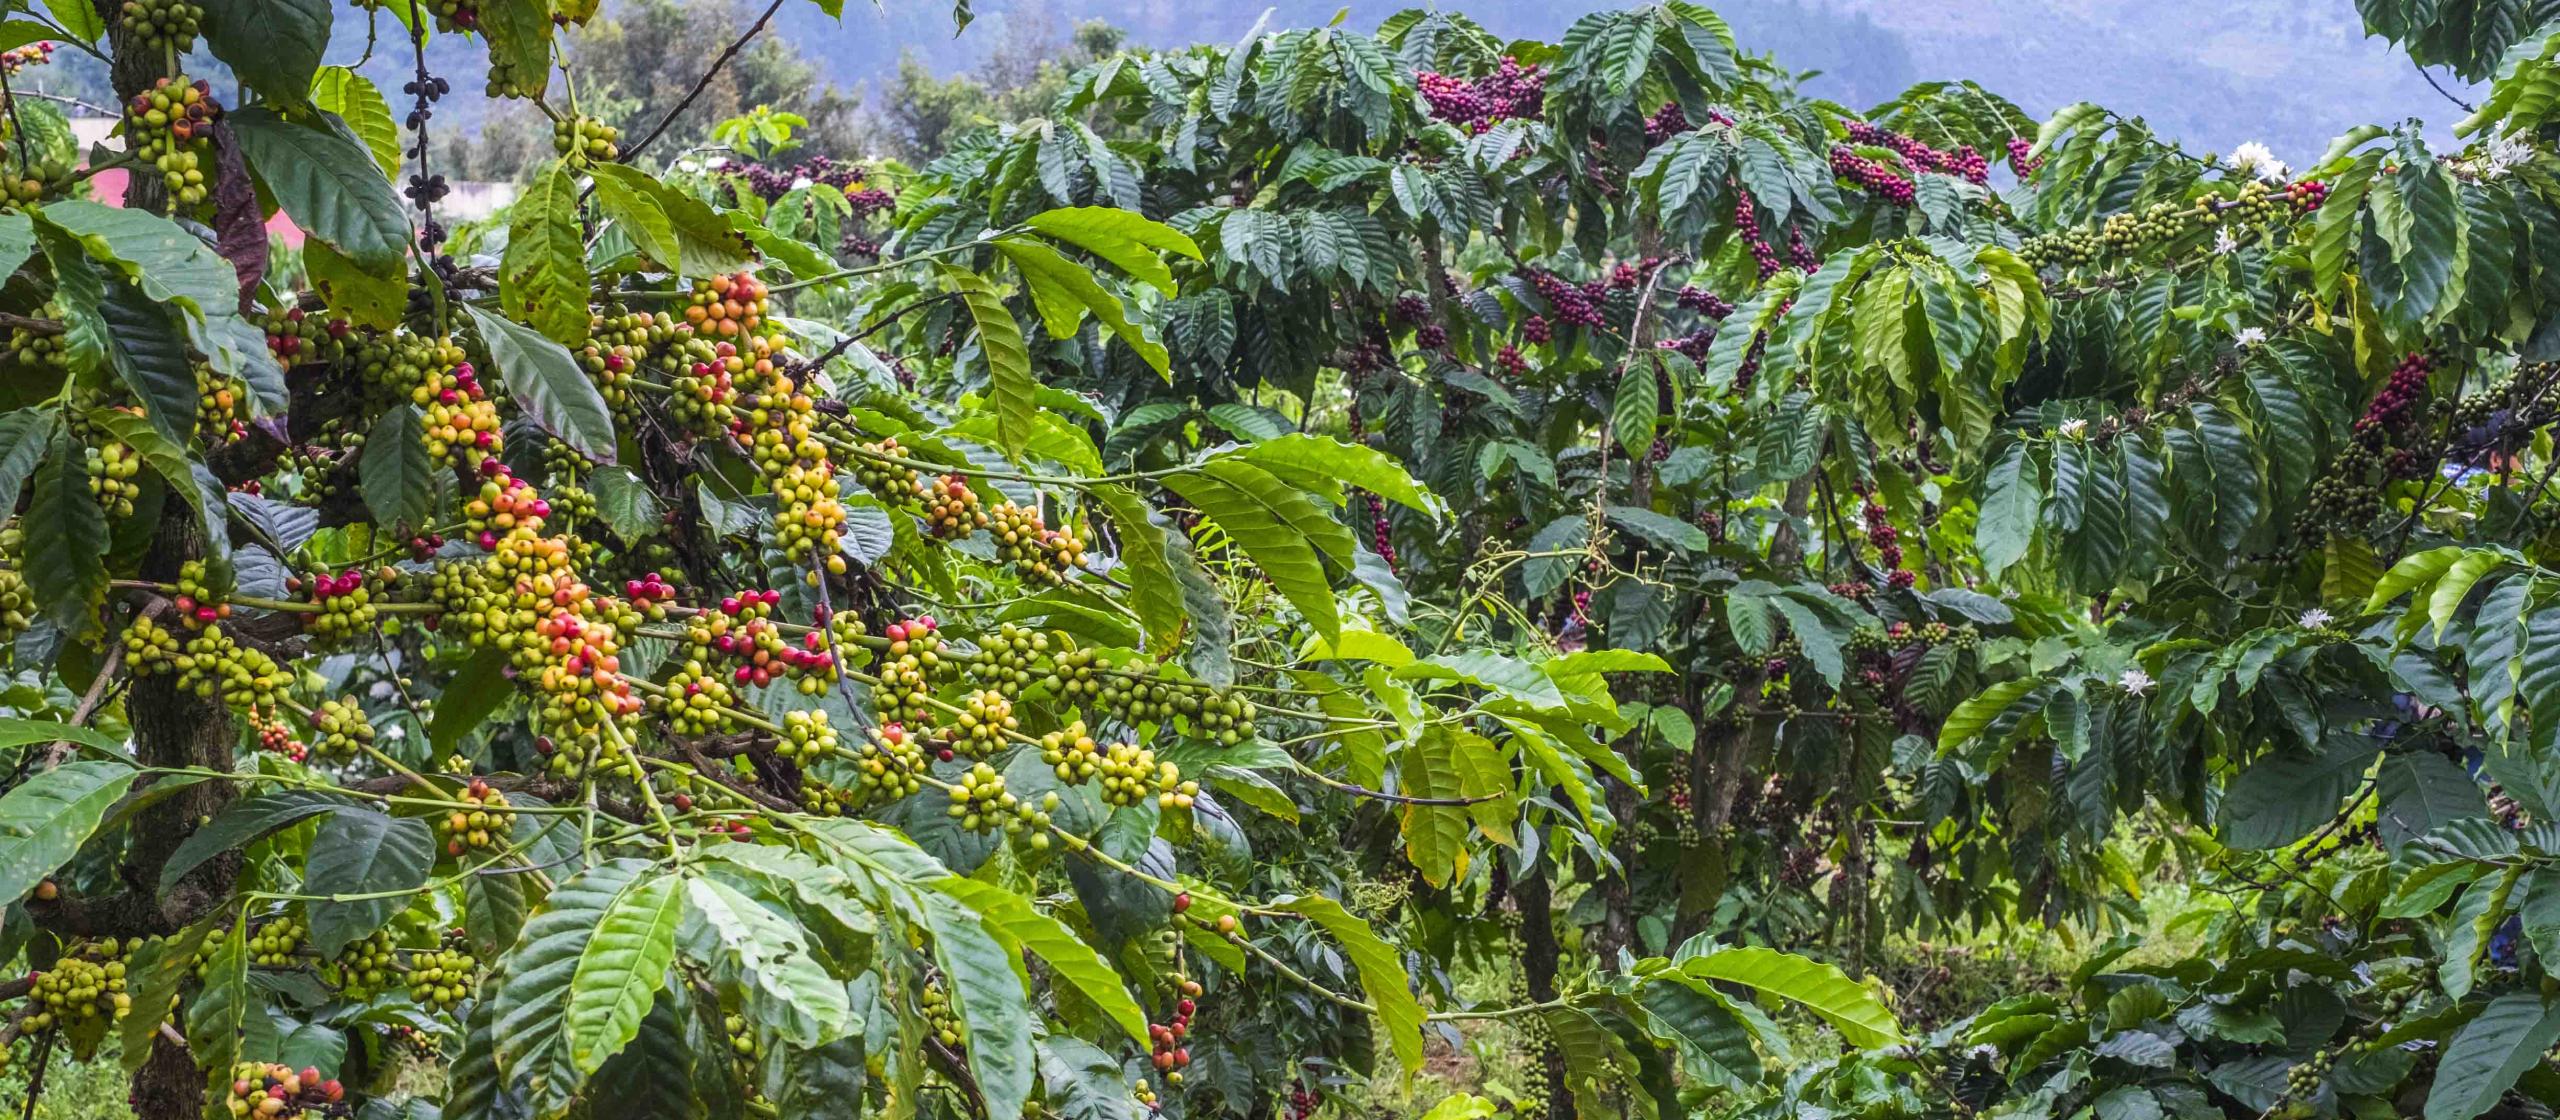 Coffee Beans in the mountains of Central Highlands Vietnam